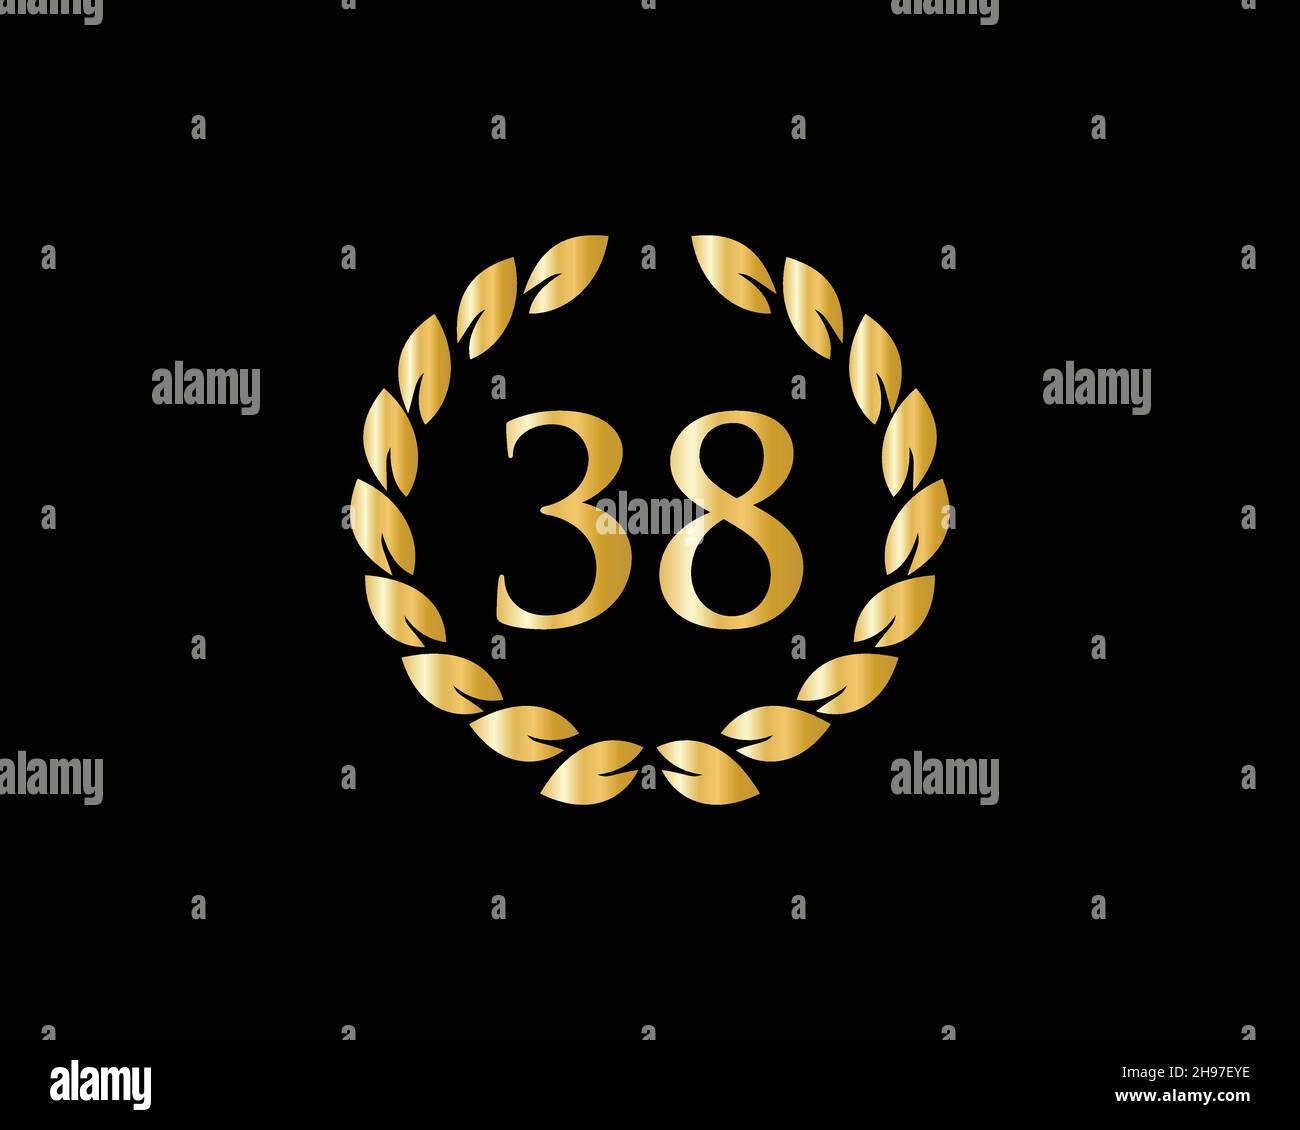 38th Anniversary Ring Logo Template. 38th Years Anniversary Logo With Golden Ring Isolated On Black Background, For Birthday, Anniversary And Company Stock Vector